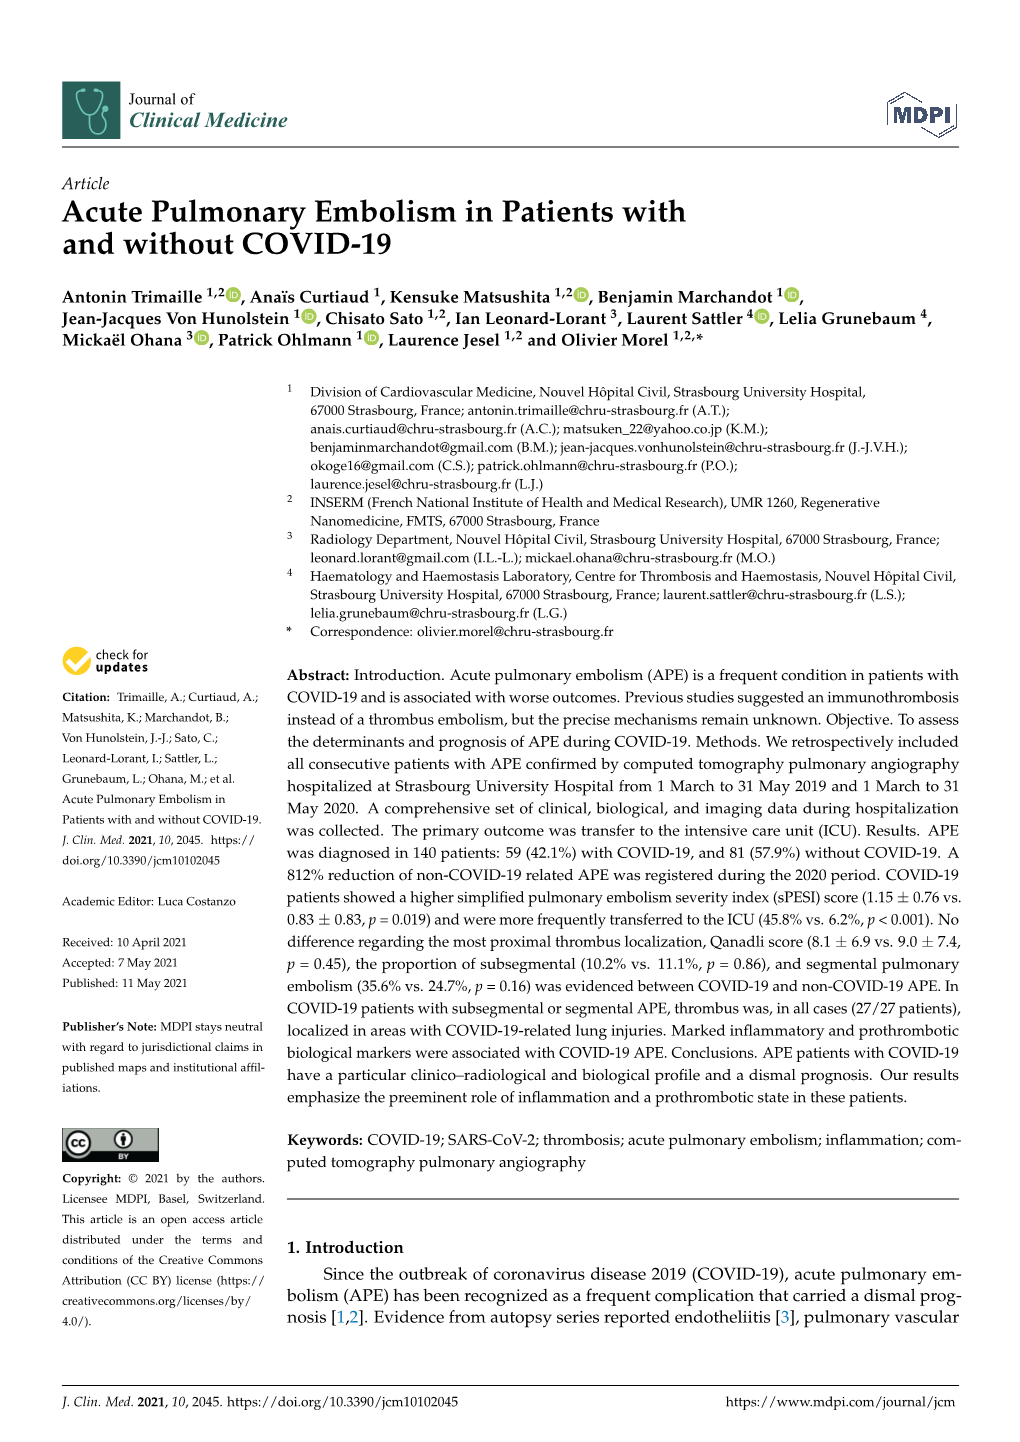 Acute Pulmonary Embolism in Patients with and Without COVID-19